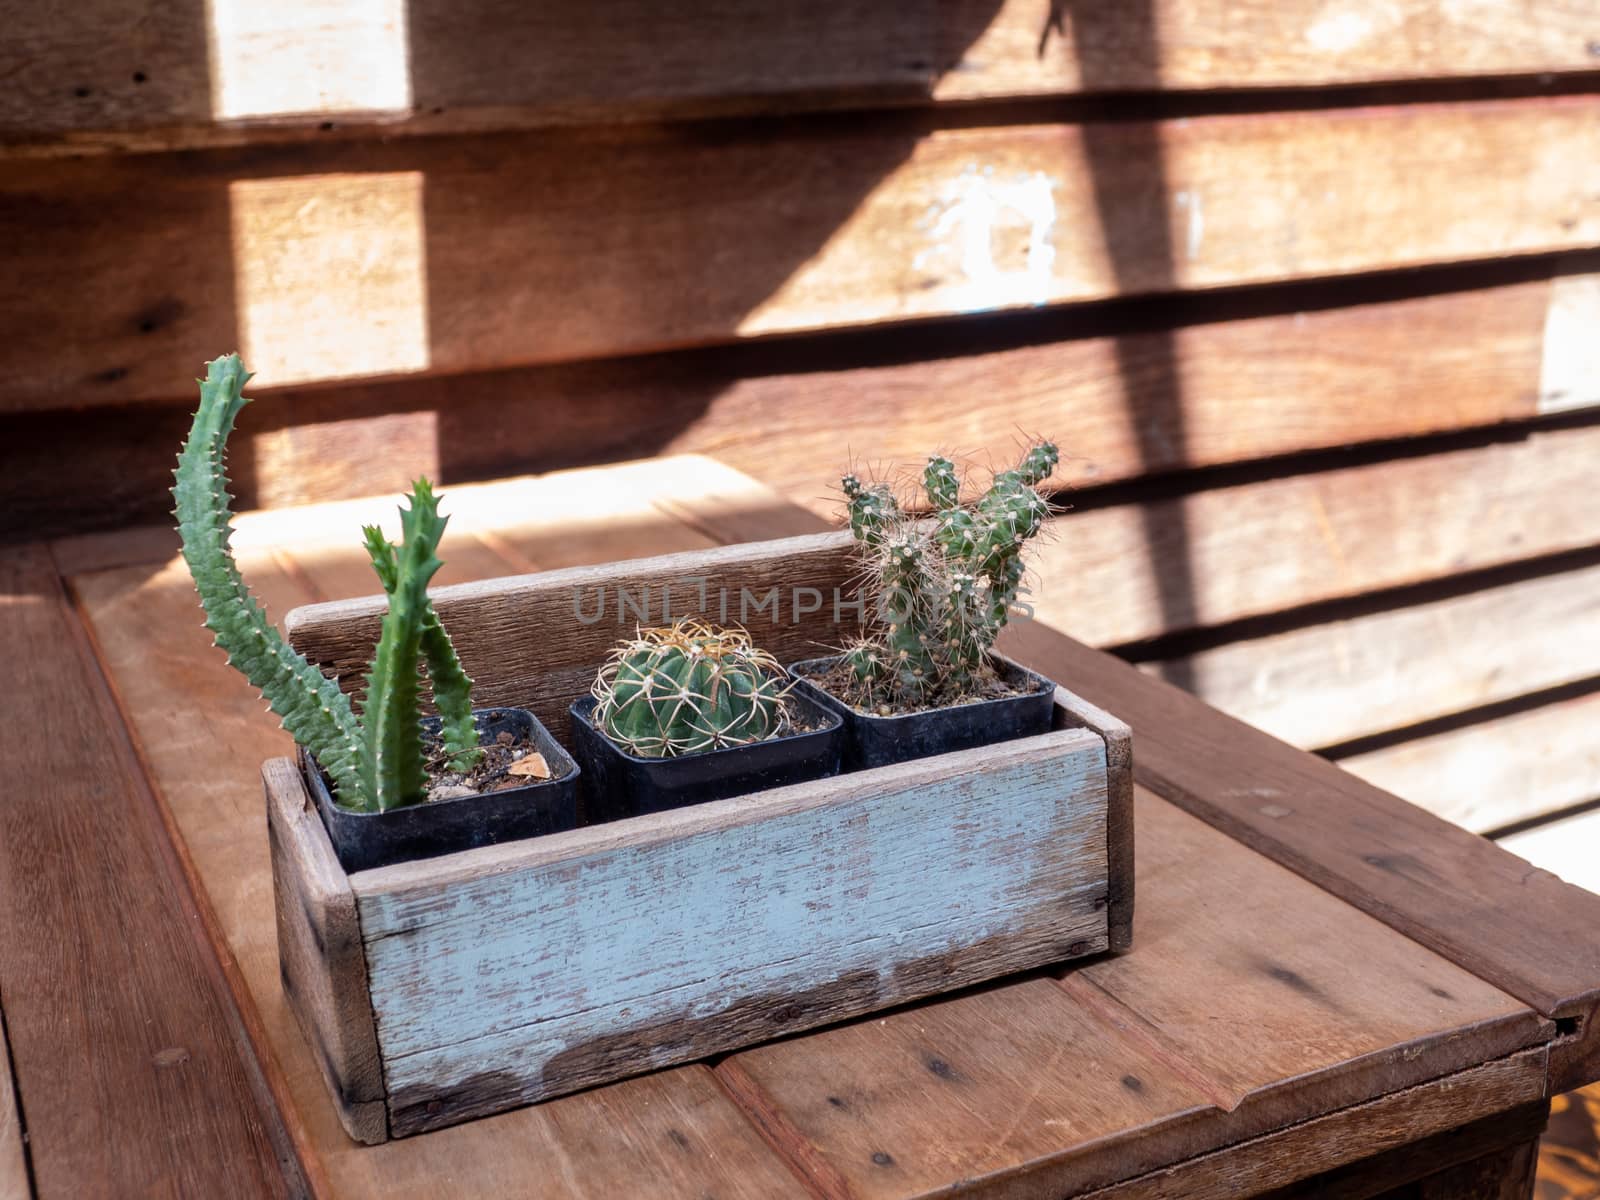 cactus in wooden pots placed on the wooden table